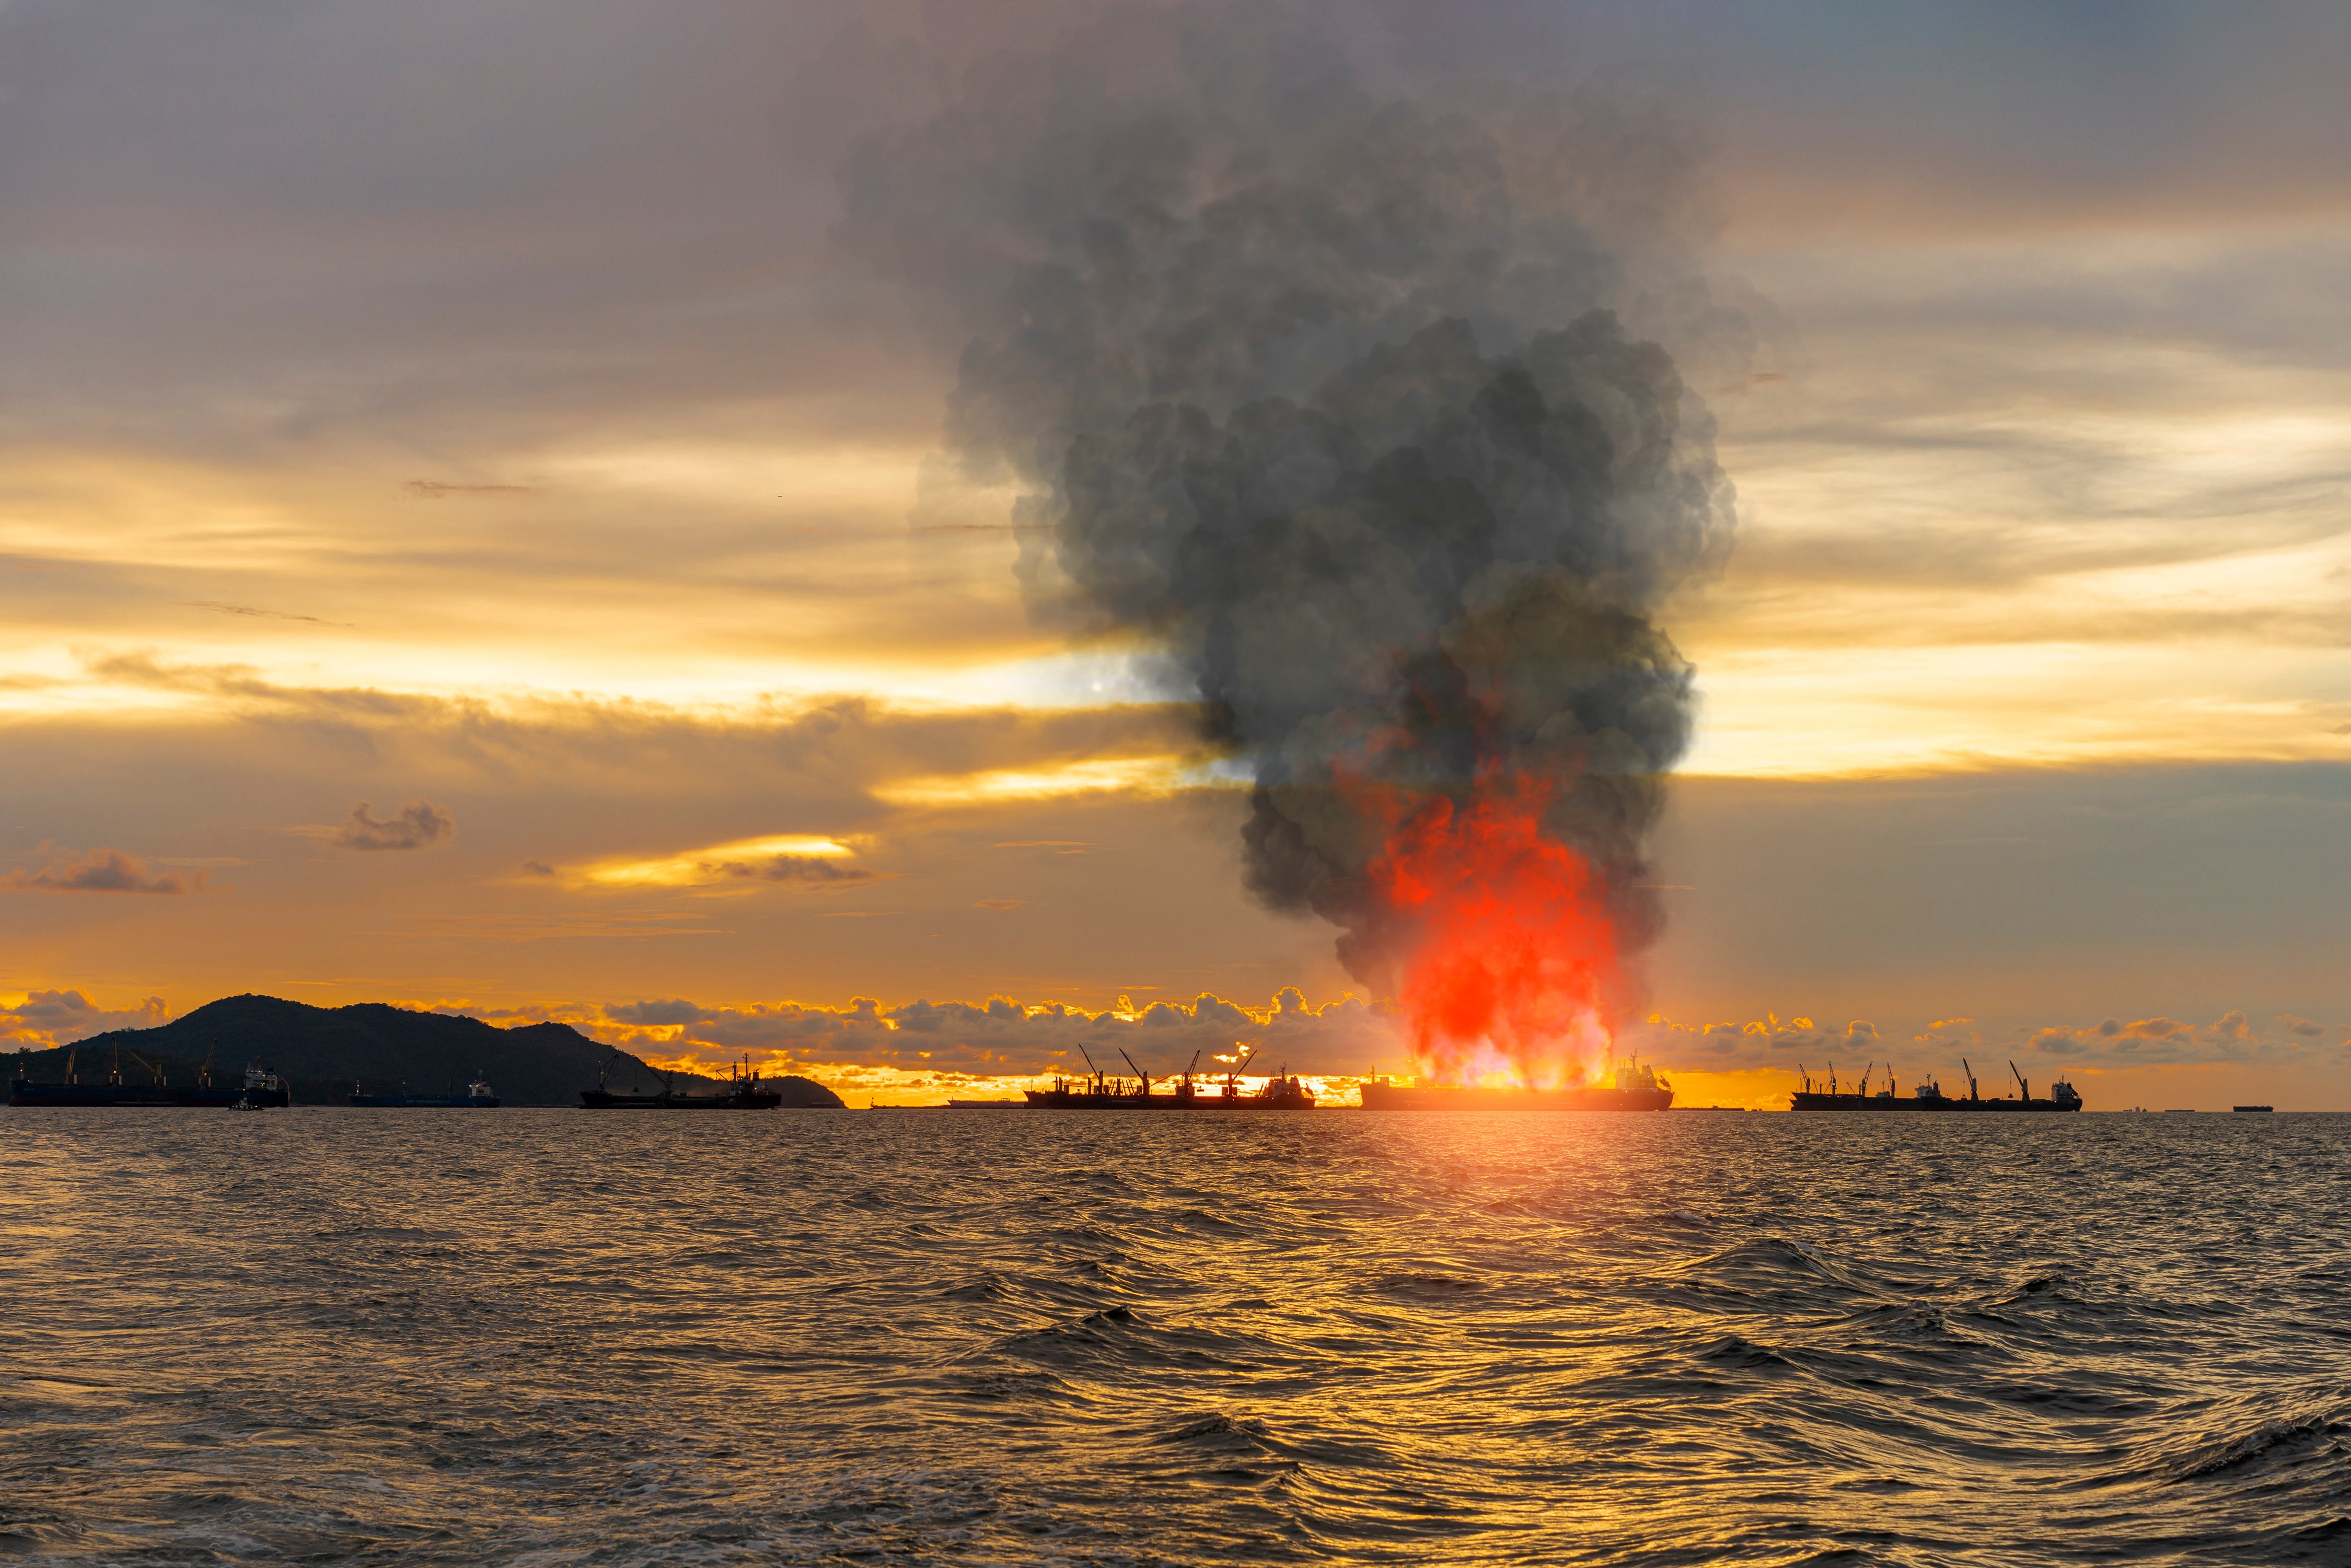 Fortunately, ship fires are rare, but on the other hand often serious for both crew, vessel, cargo and the maritime environment.